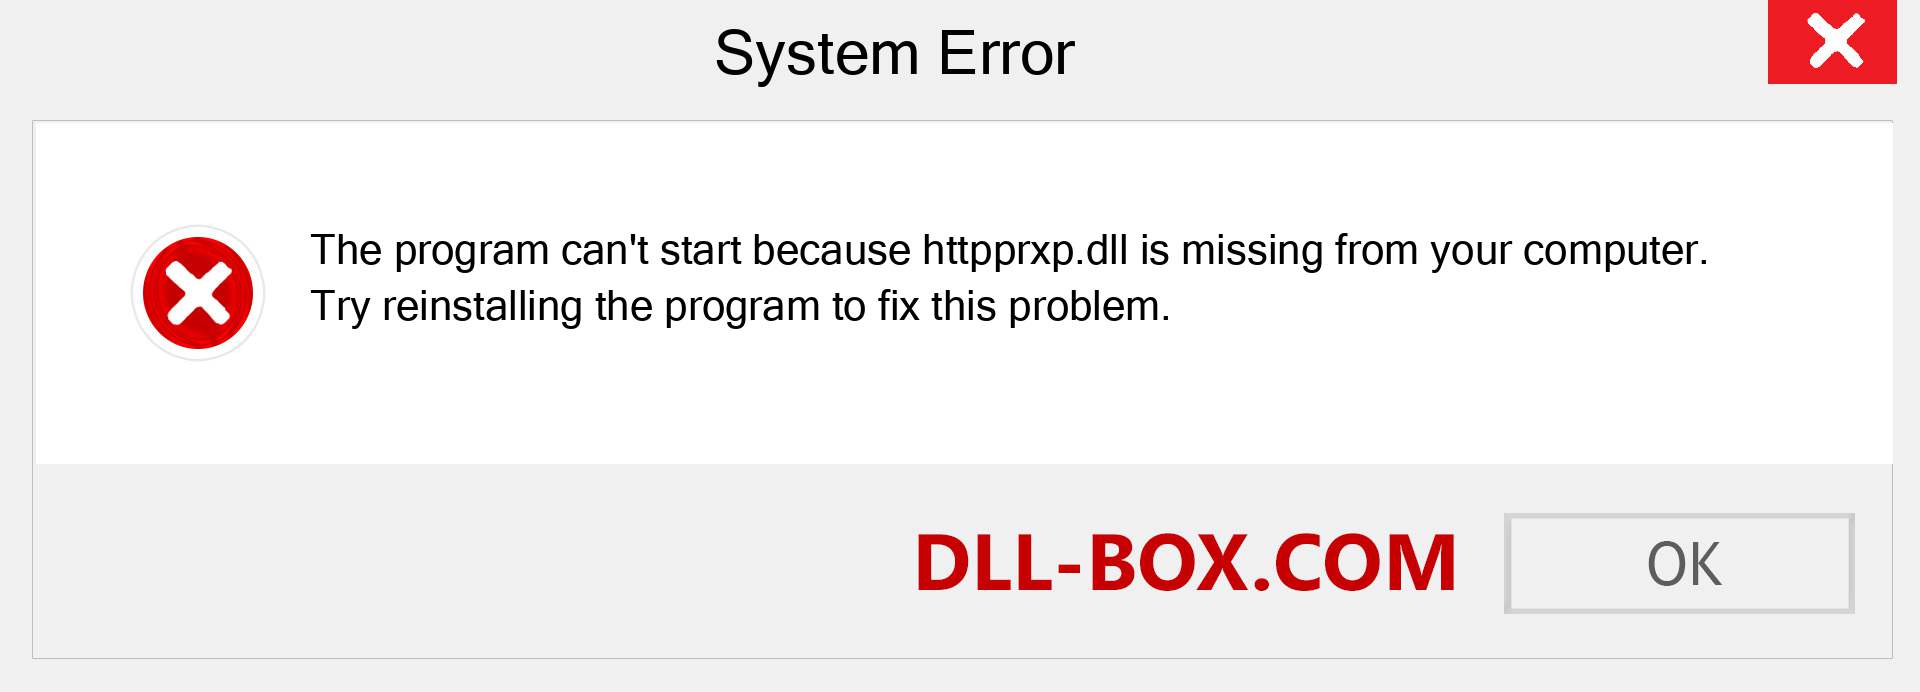  httpprxp.dll file is missing?. Download for Windows 7, 8, 10 - Fix  httpprxp dll Missing Error on Windows, photos, images